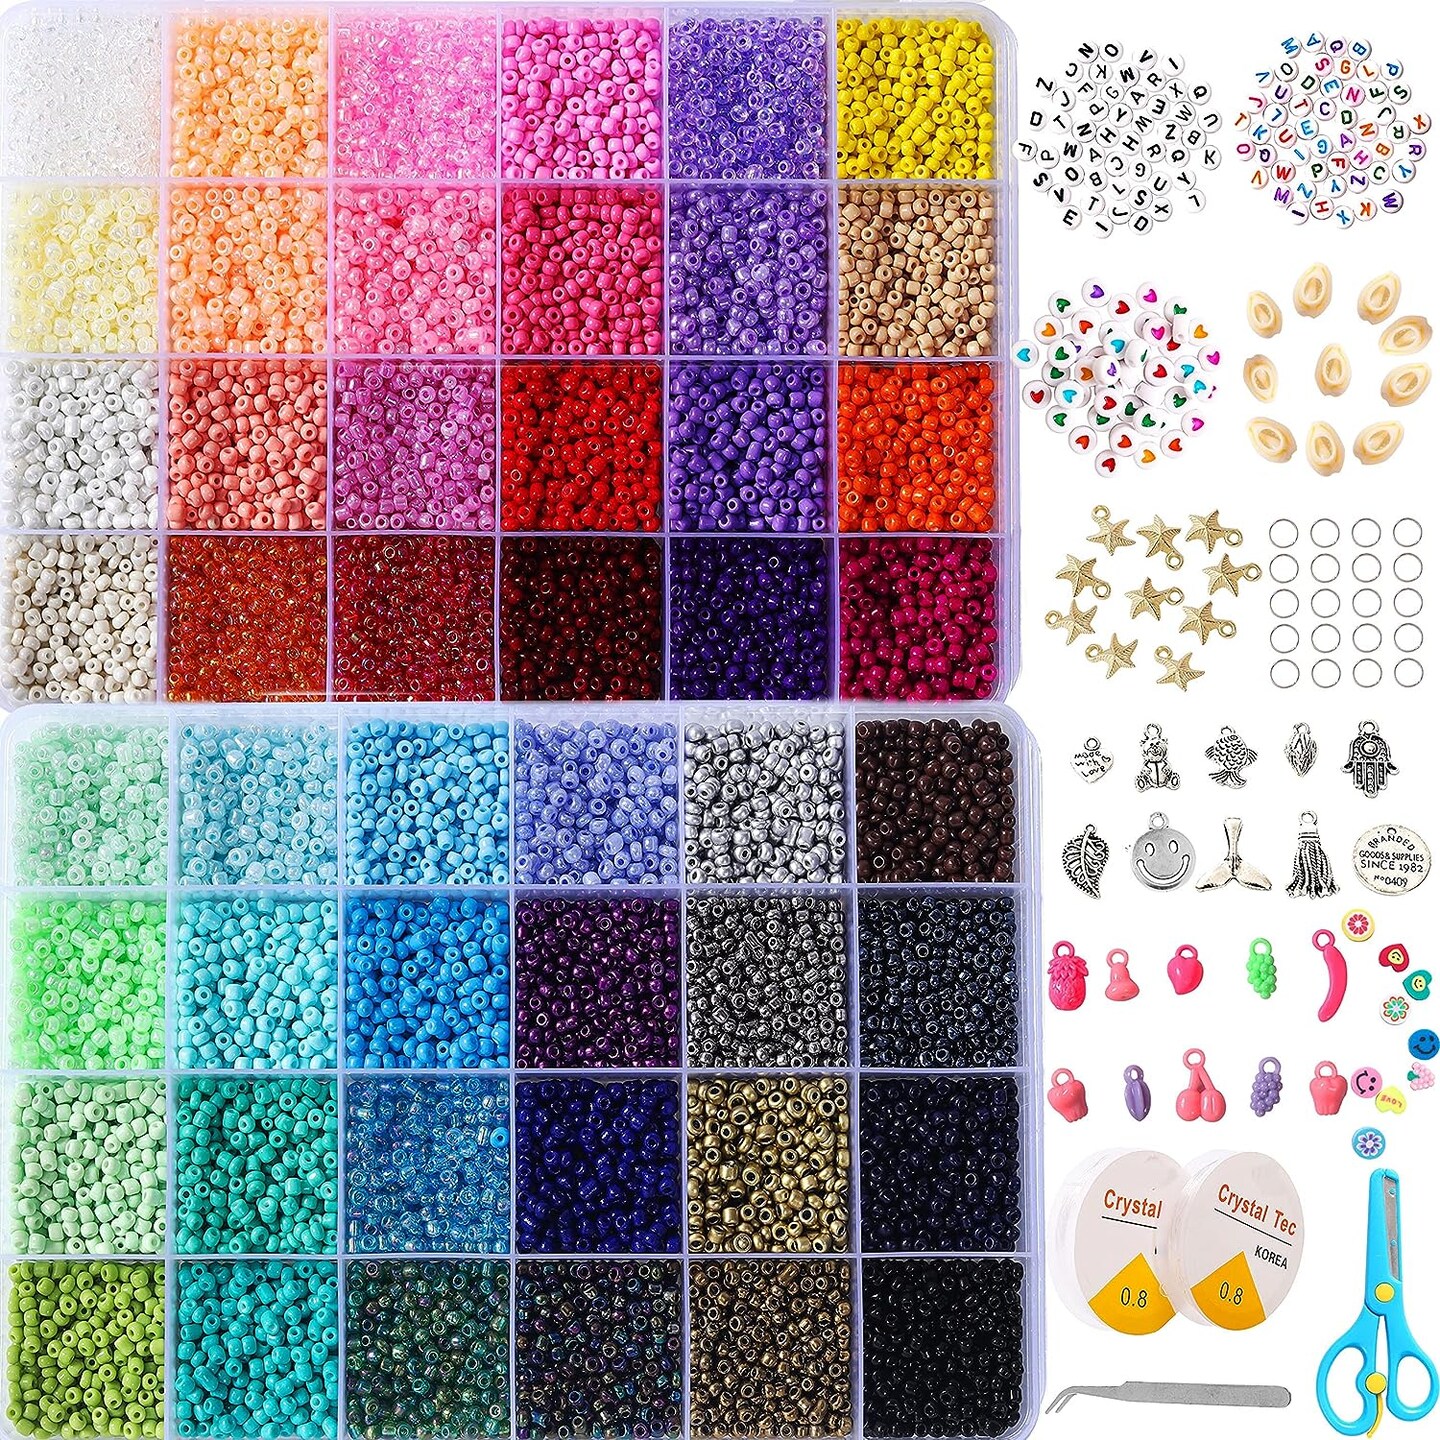 8800+pcs 4mm 12/0 48 Colors Glass Seed Beads, Charms Bracelet Jewelry Making Beads Kit Gifts for Teen Girls Crafts for Girls Ages 8-12 Birthday Gifts